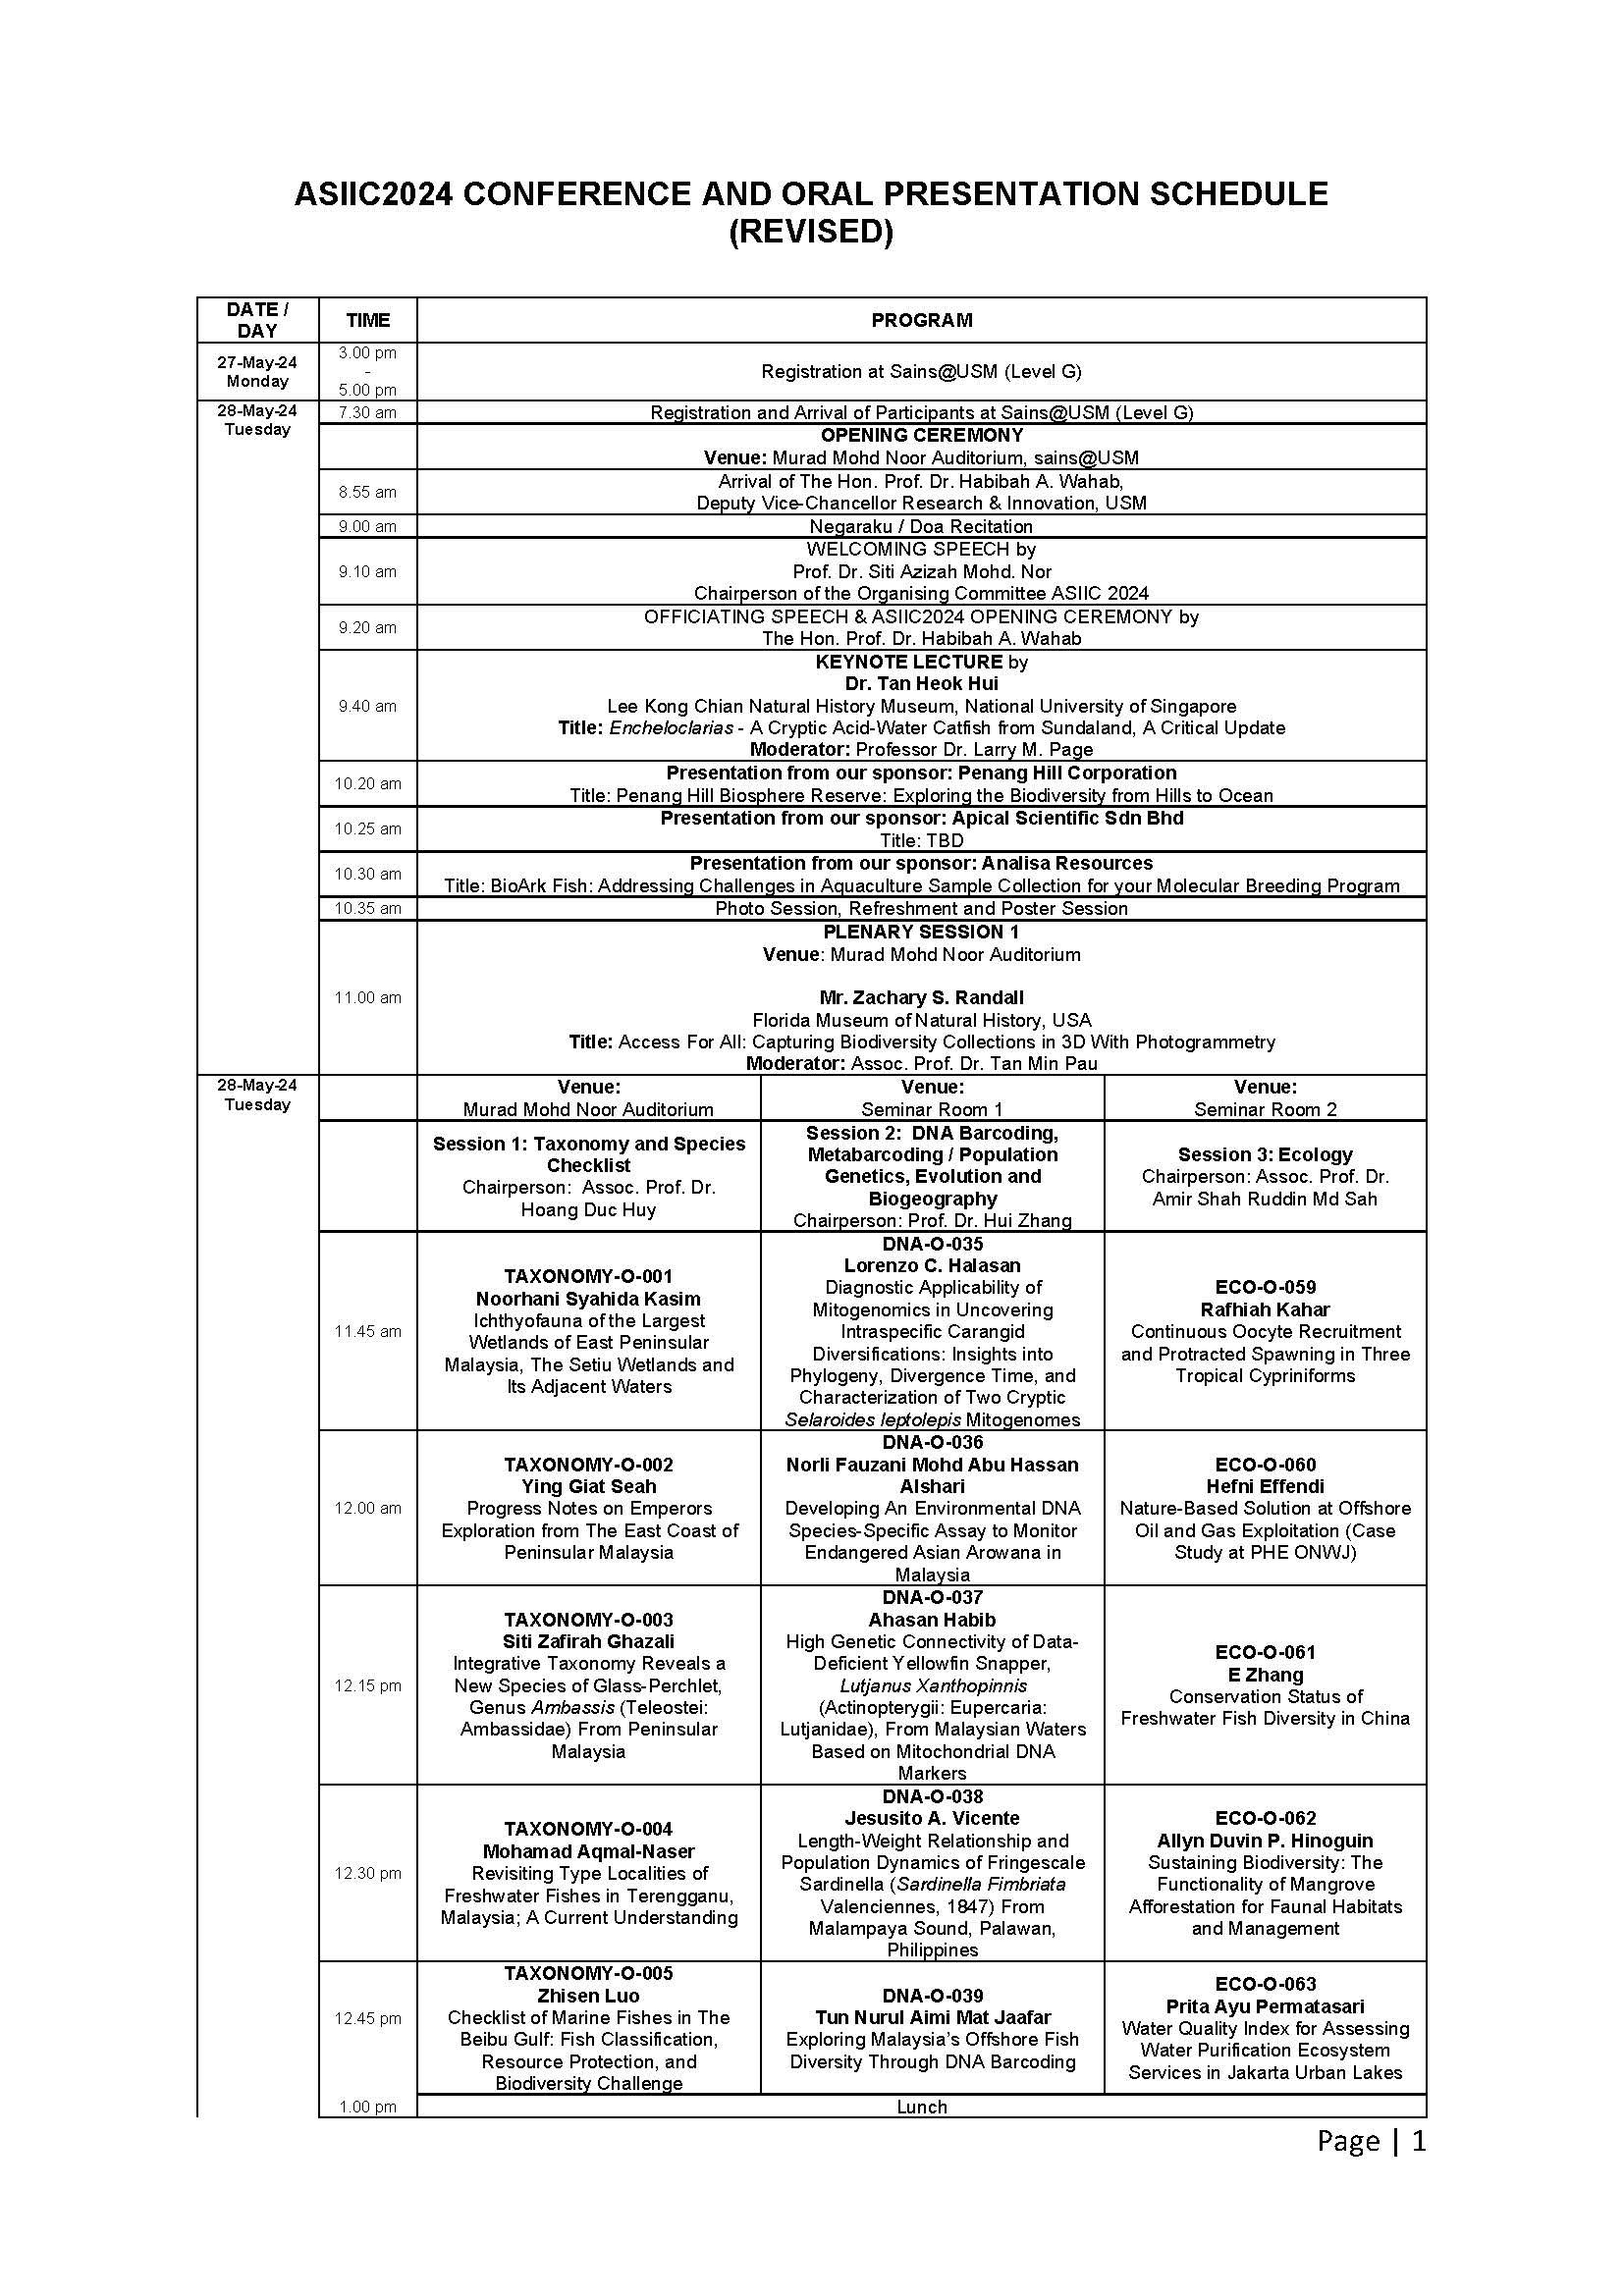 ASIIC2024 CONFERENCE AND ORAL PRESENTATION SCHEDULE Page 1